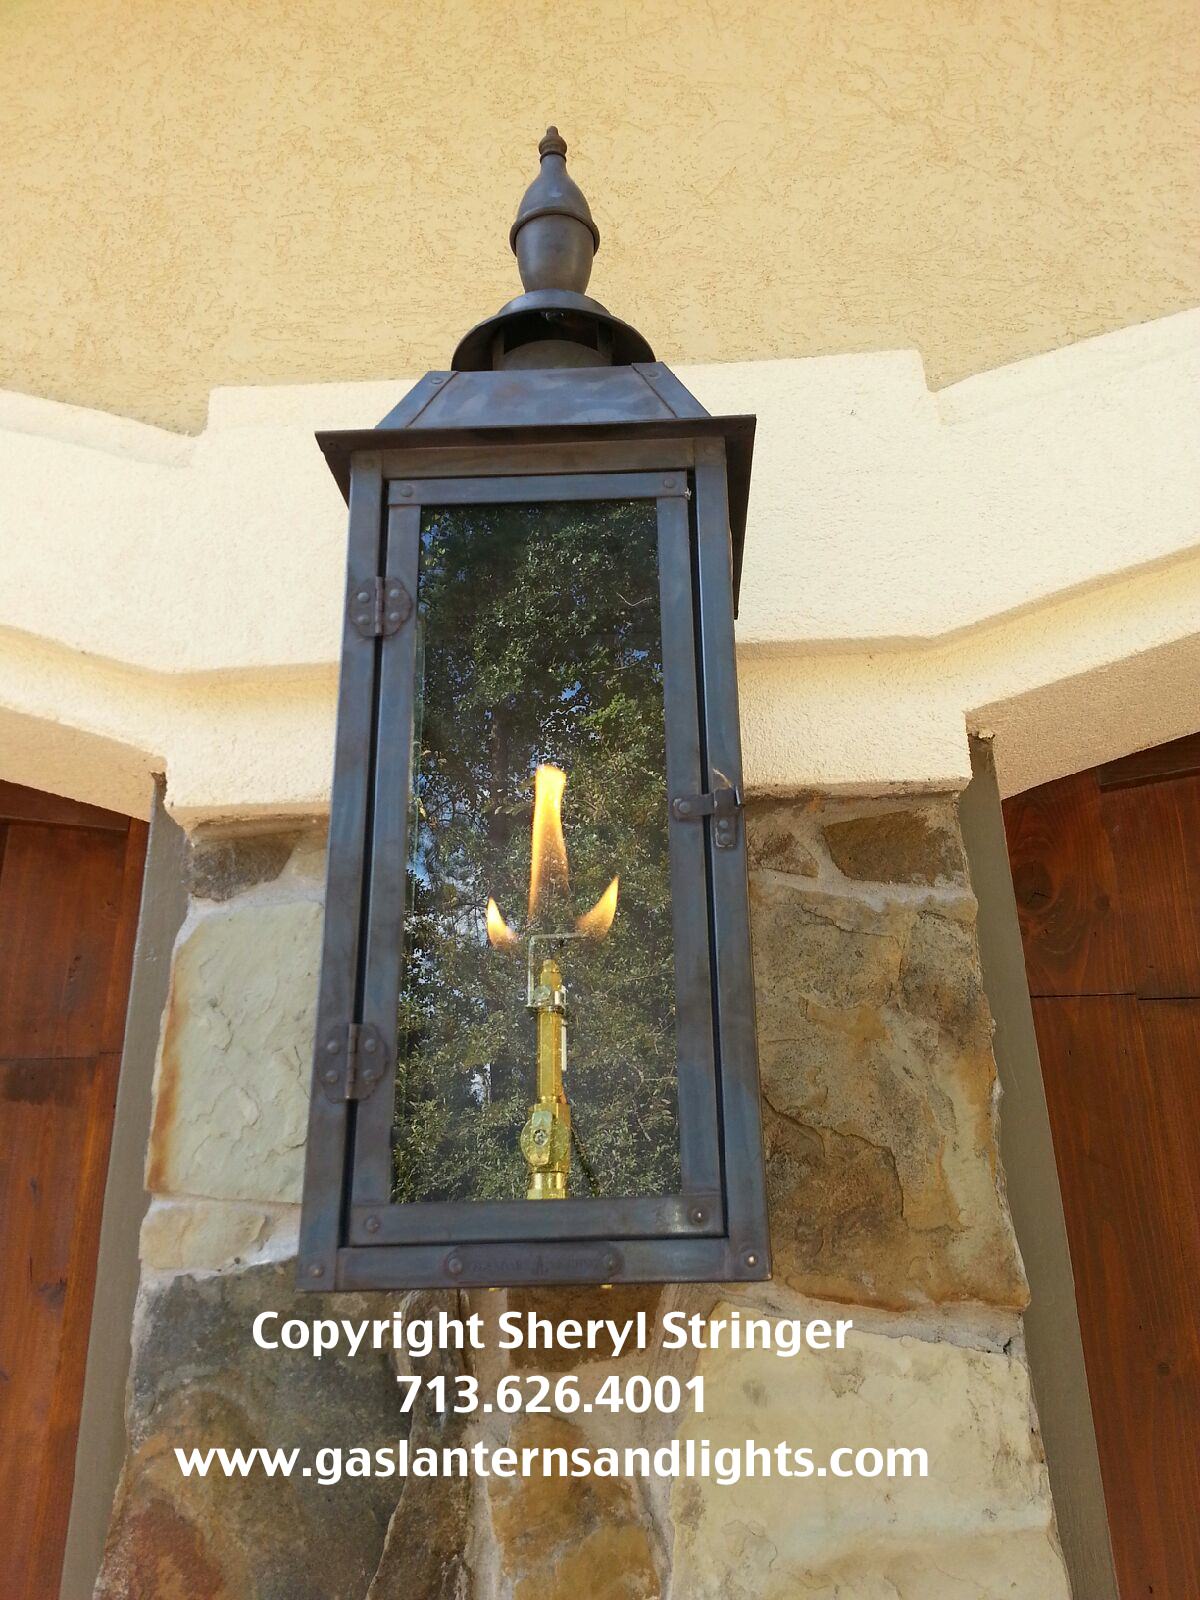 The Montgomery Gas Lantern with Electronic Ignition by Sheryl Stringer